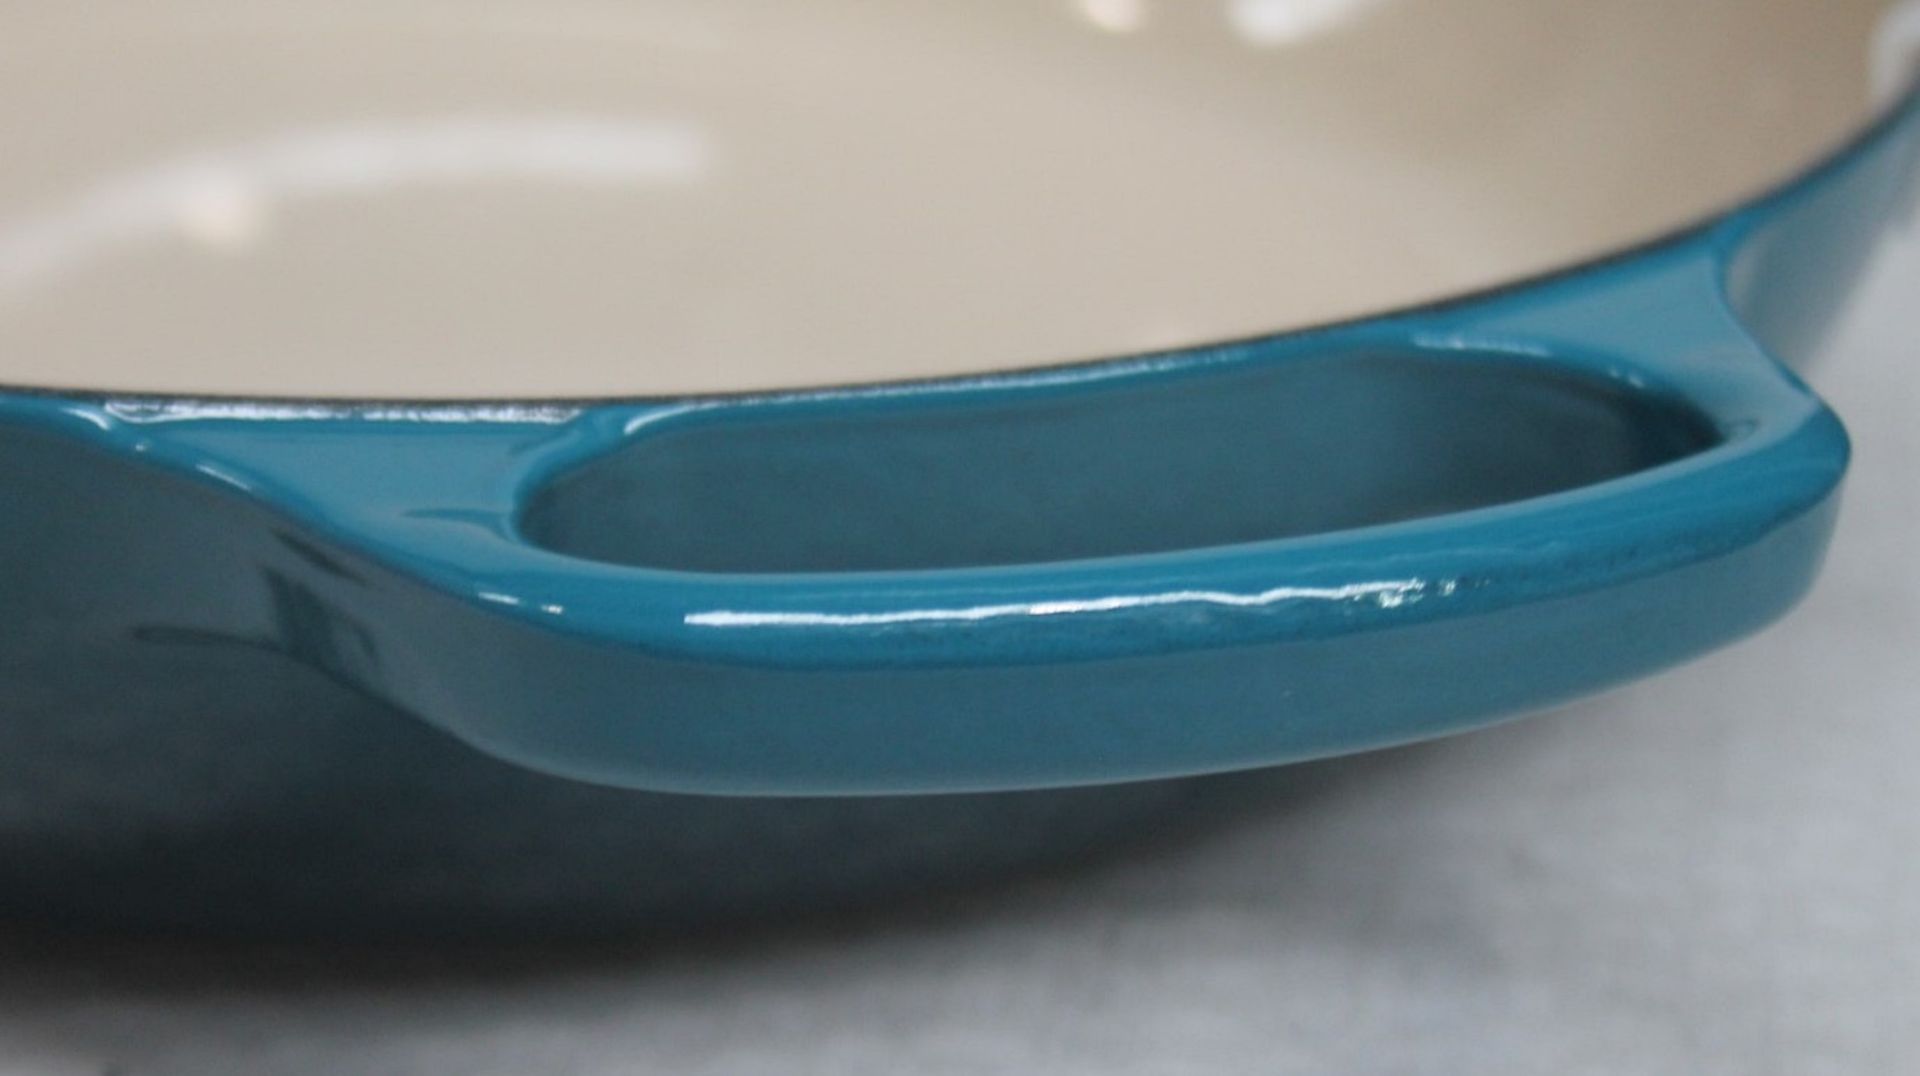 1 x LE CREUSET 'Signature' Enamelled Cast Iron Shallow Casserole Dish In Teal - RRP £270.00 - Image 12 of 13